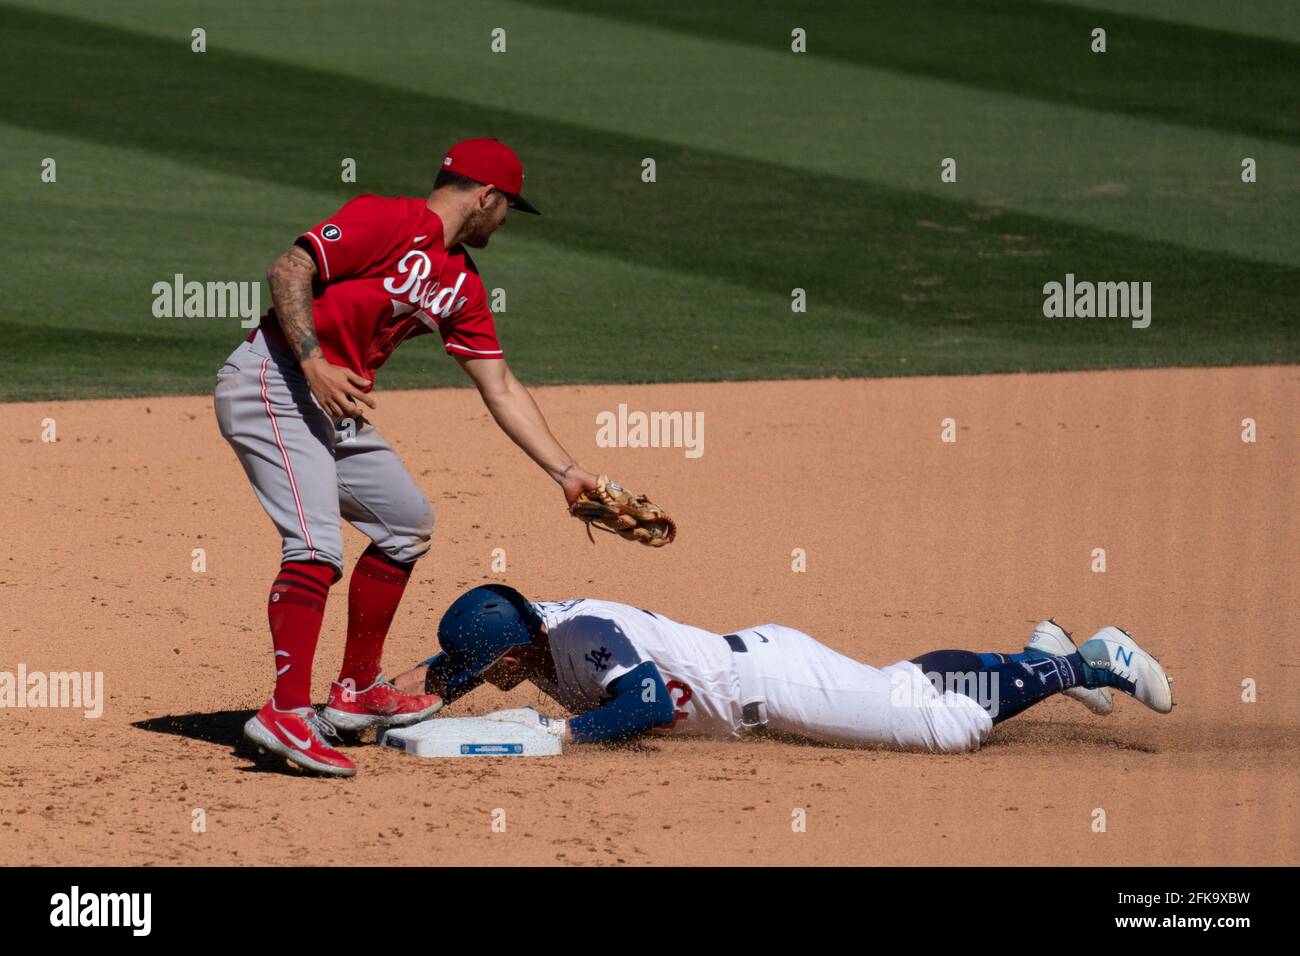 Los Angeles Dodgers first baseman Matt Beaty (45) steals second base during a MLB game against the Los Angeles Dodgers, Wednesday, April 28, 2021, in Stock Photo